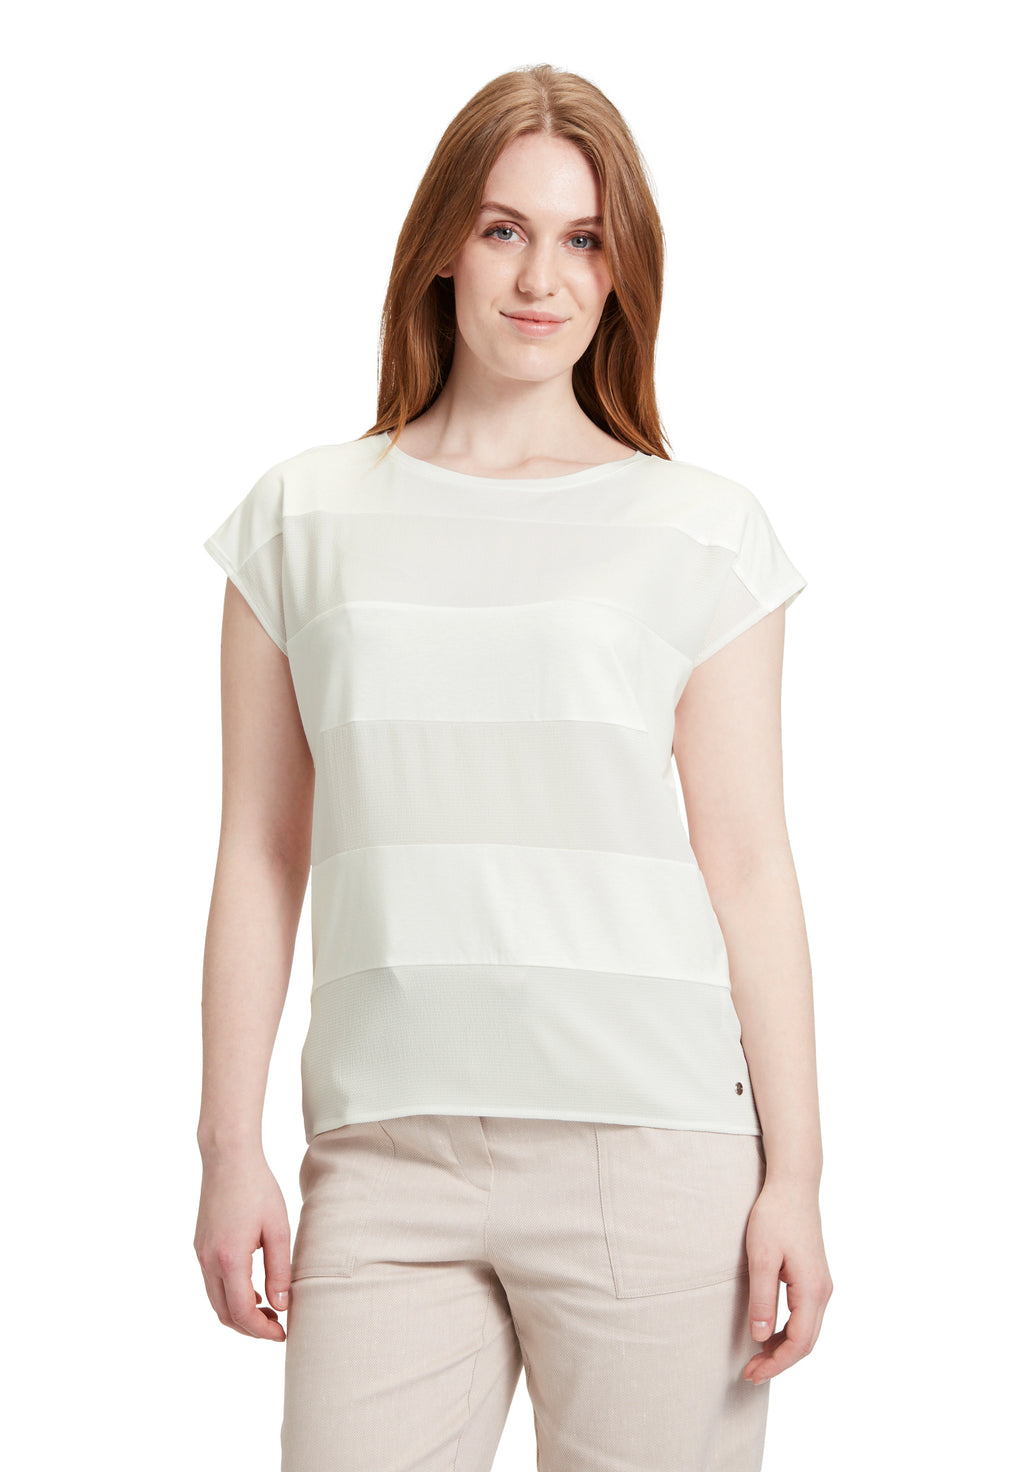 Betty & Co different textured block stripe tshirt in white

Product code 2061/3270